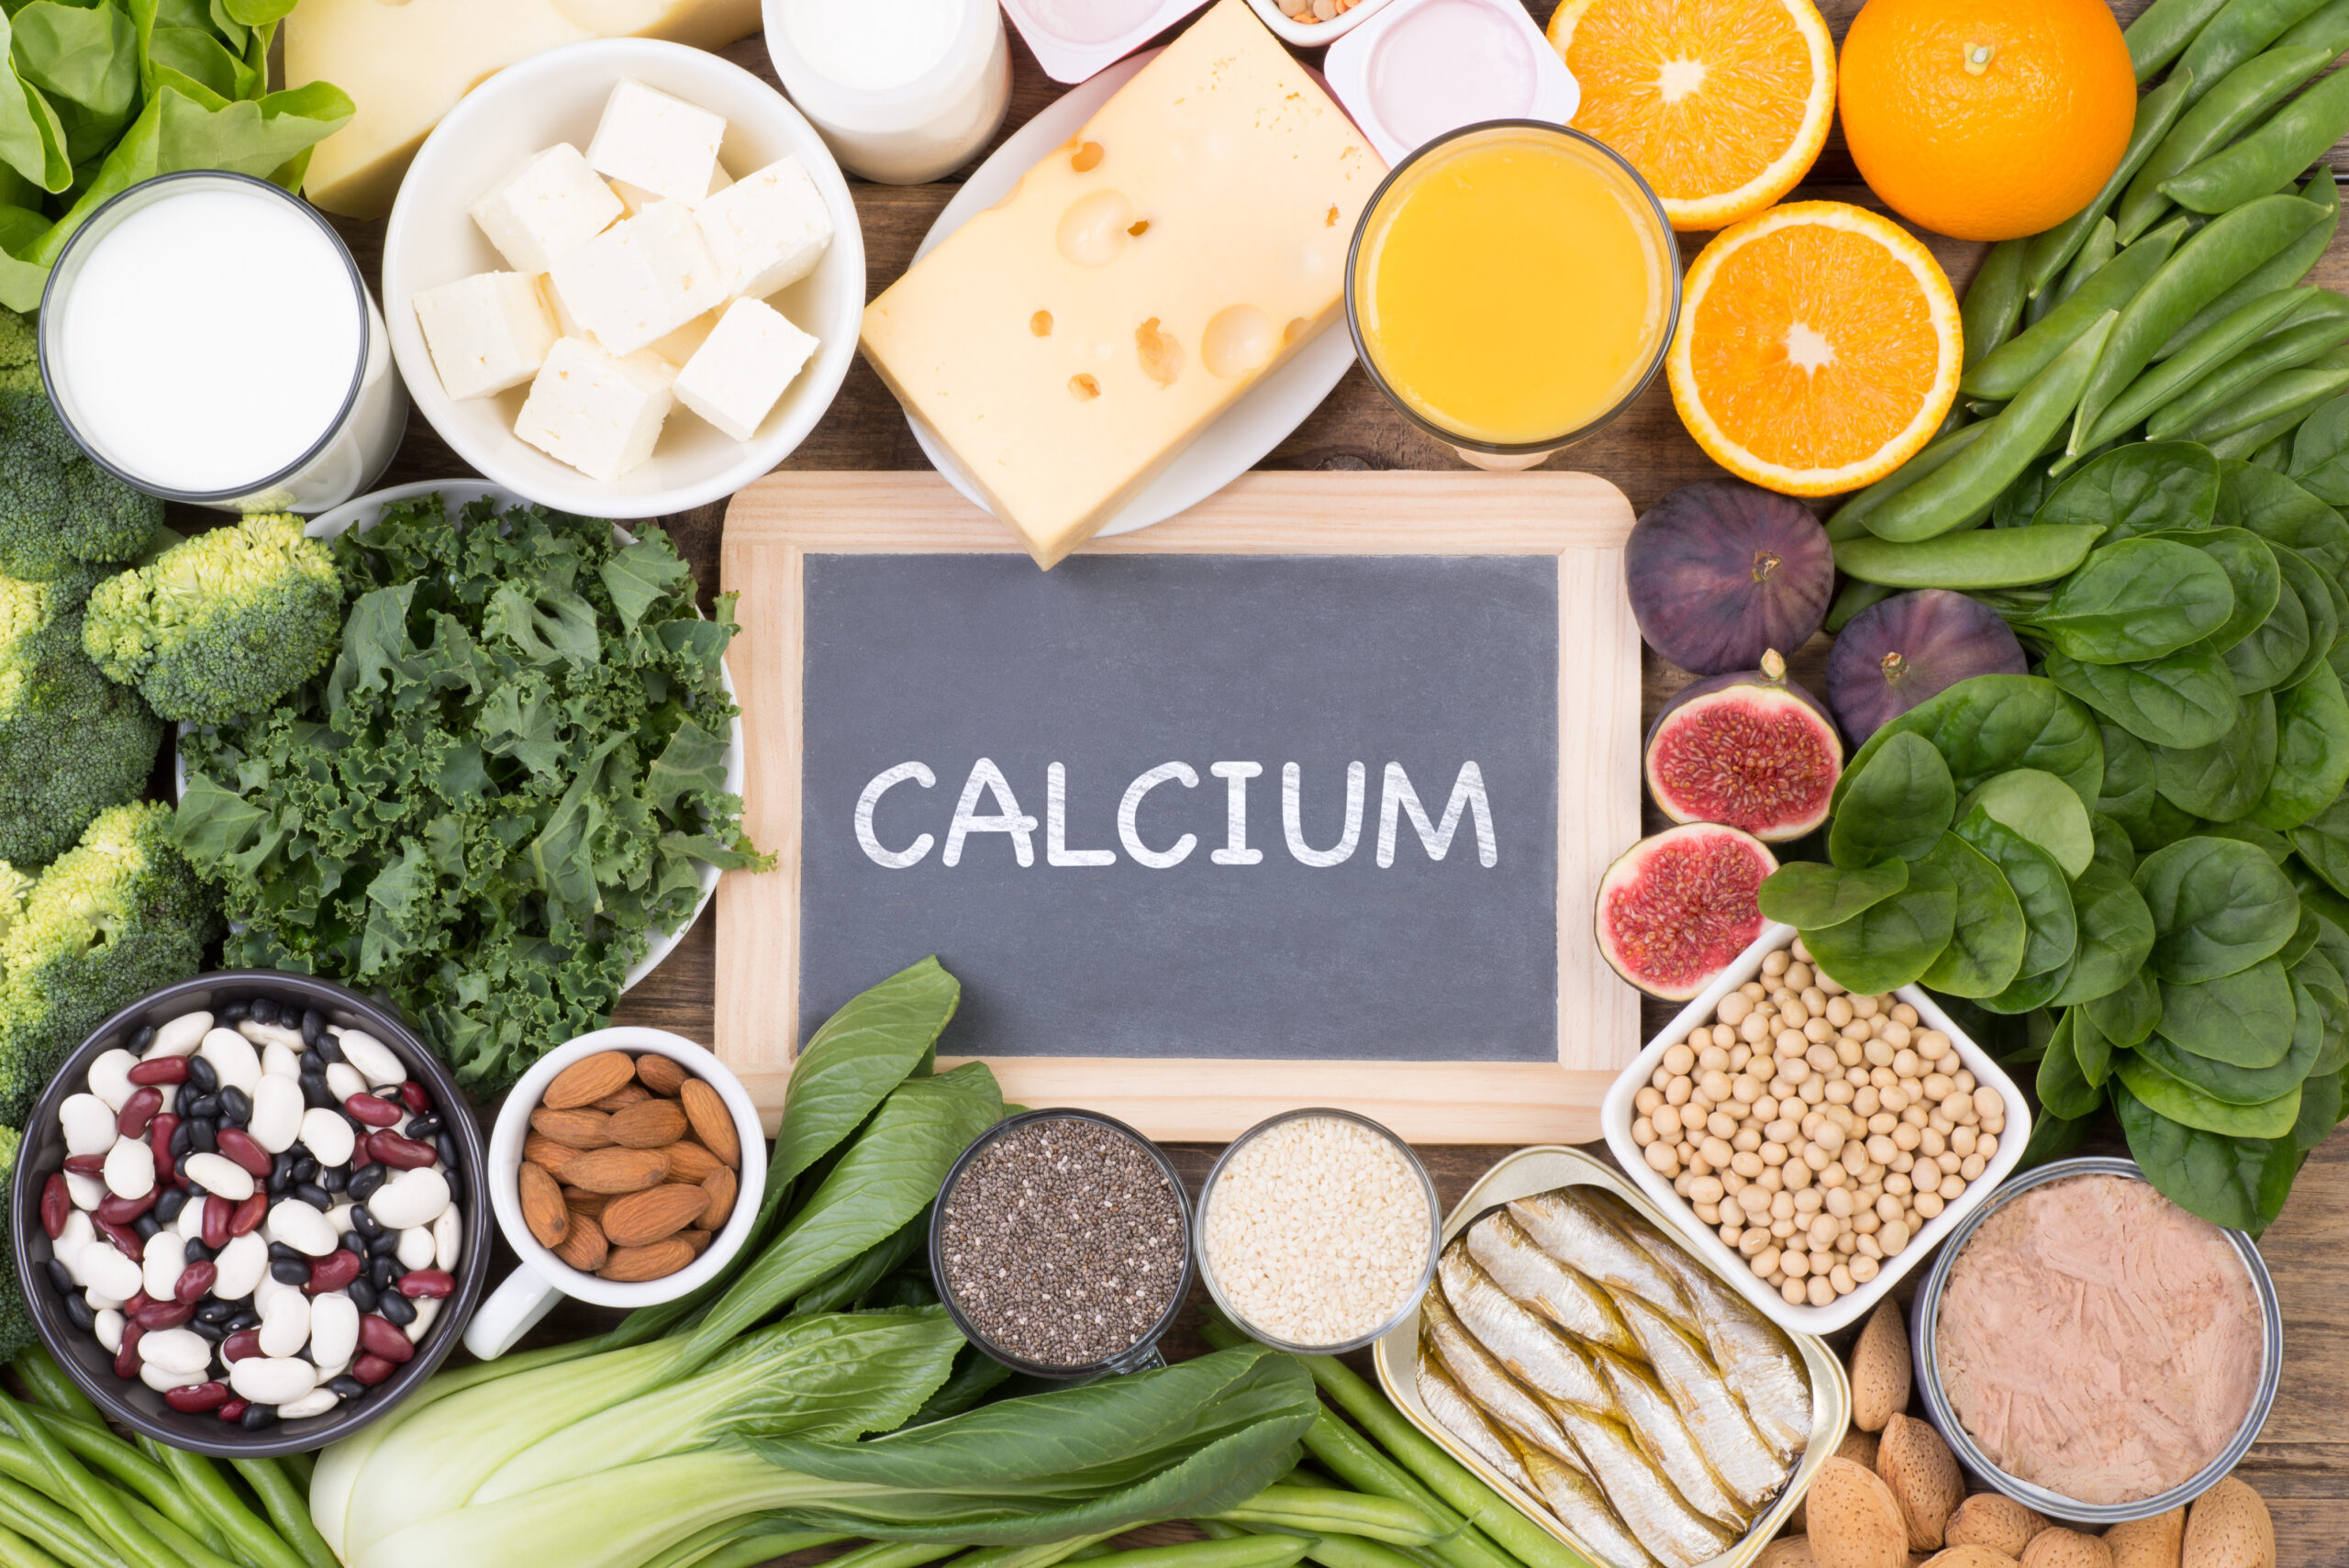 A slate with "Calcium" written on it surrounded by calcium rich foods